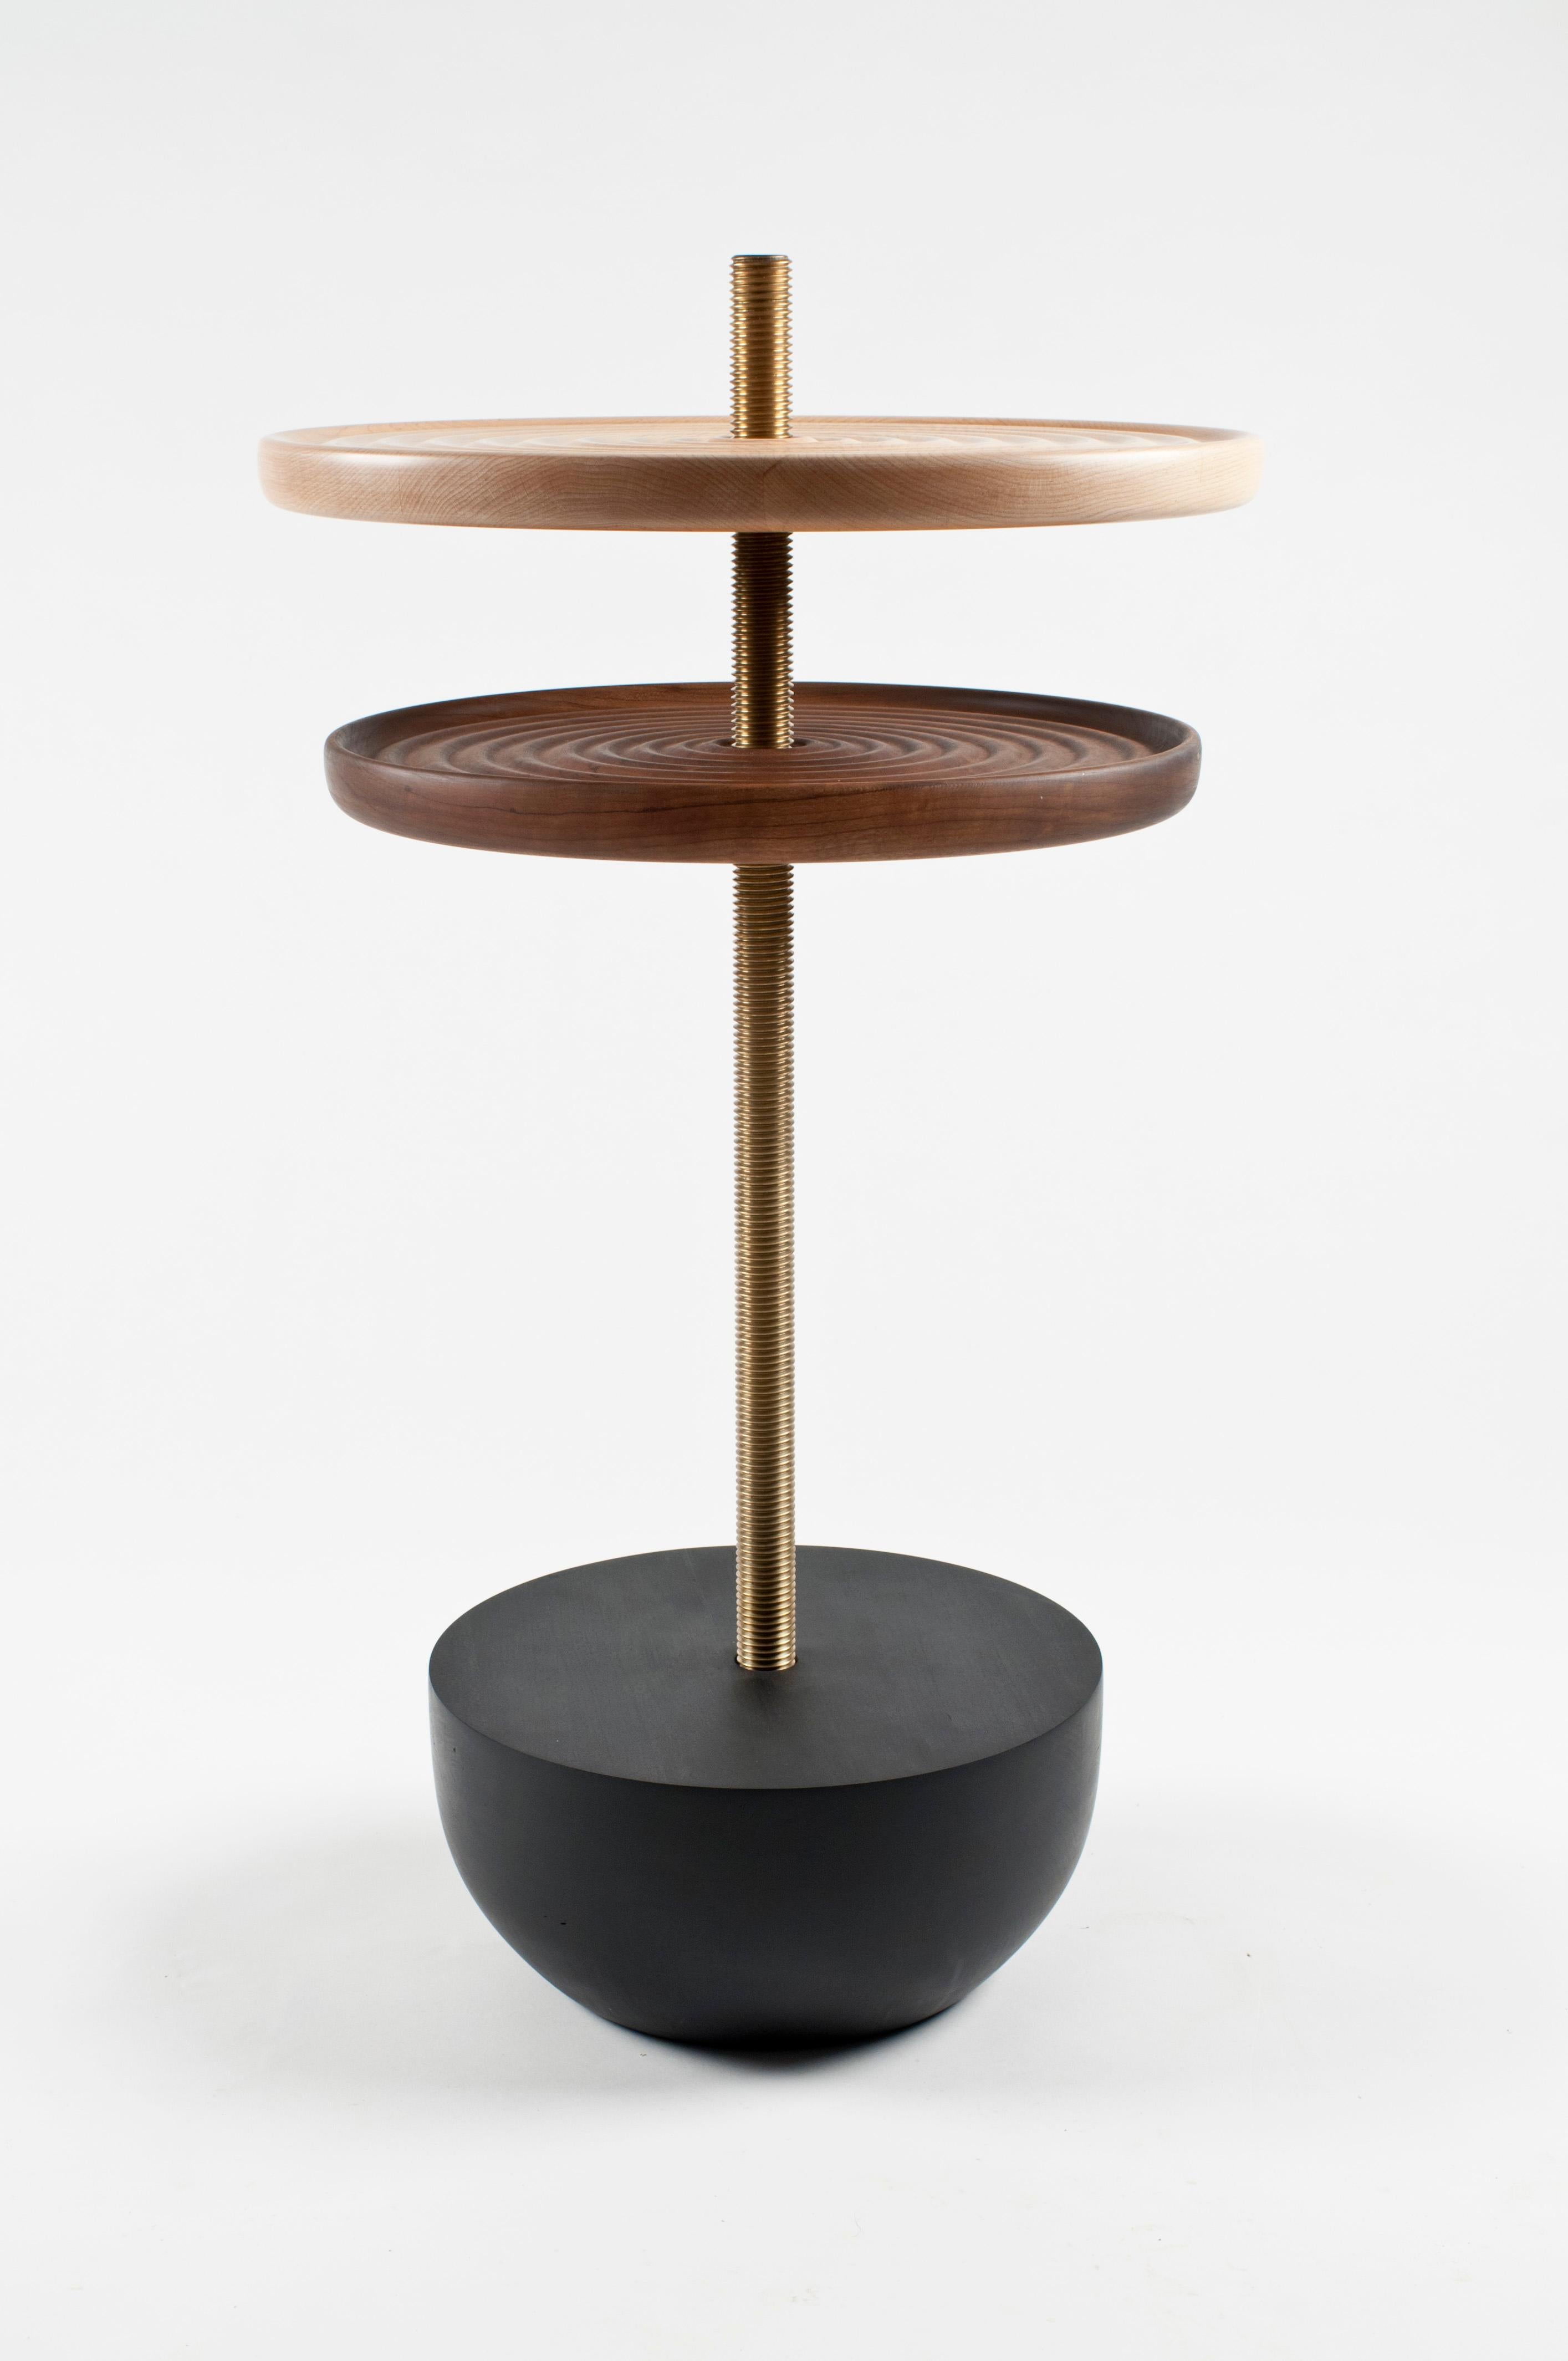 The Swivel table is handcrafted in cherry, black walnut, and brass. Each hand turned solid wood top can independently spin up and down the solid brass threaded column. Each top is double sided; the ripple textured side is visually striking and